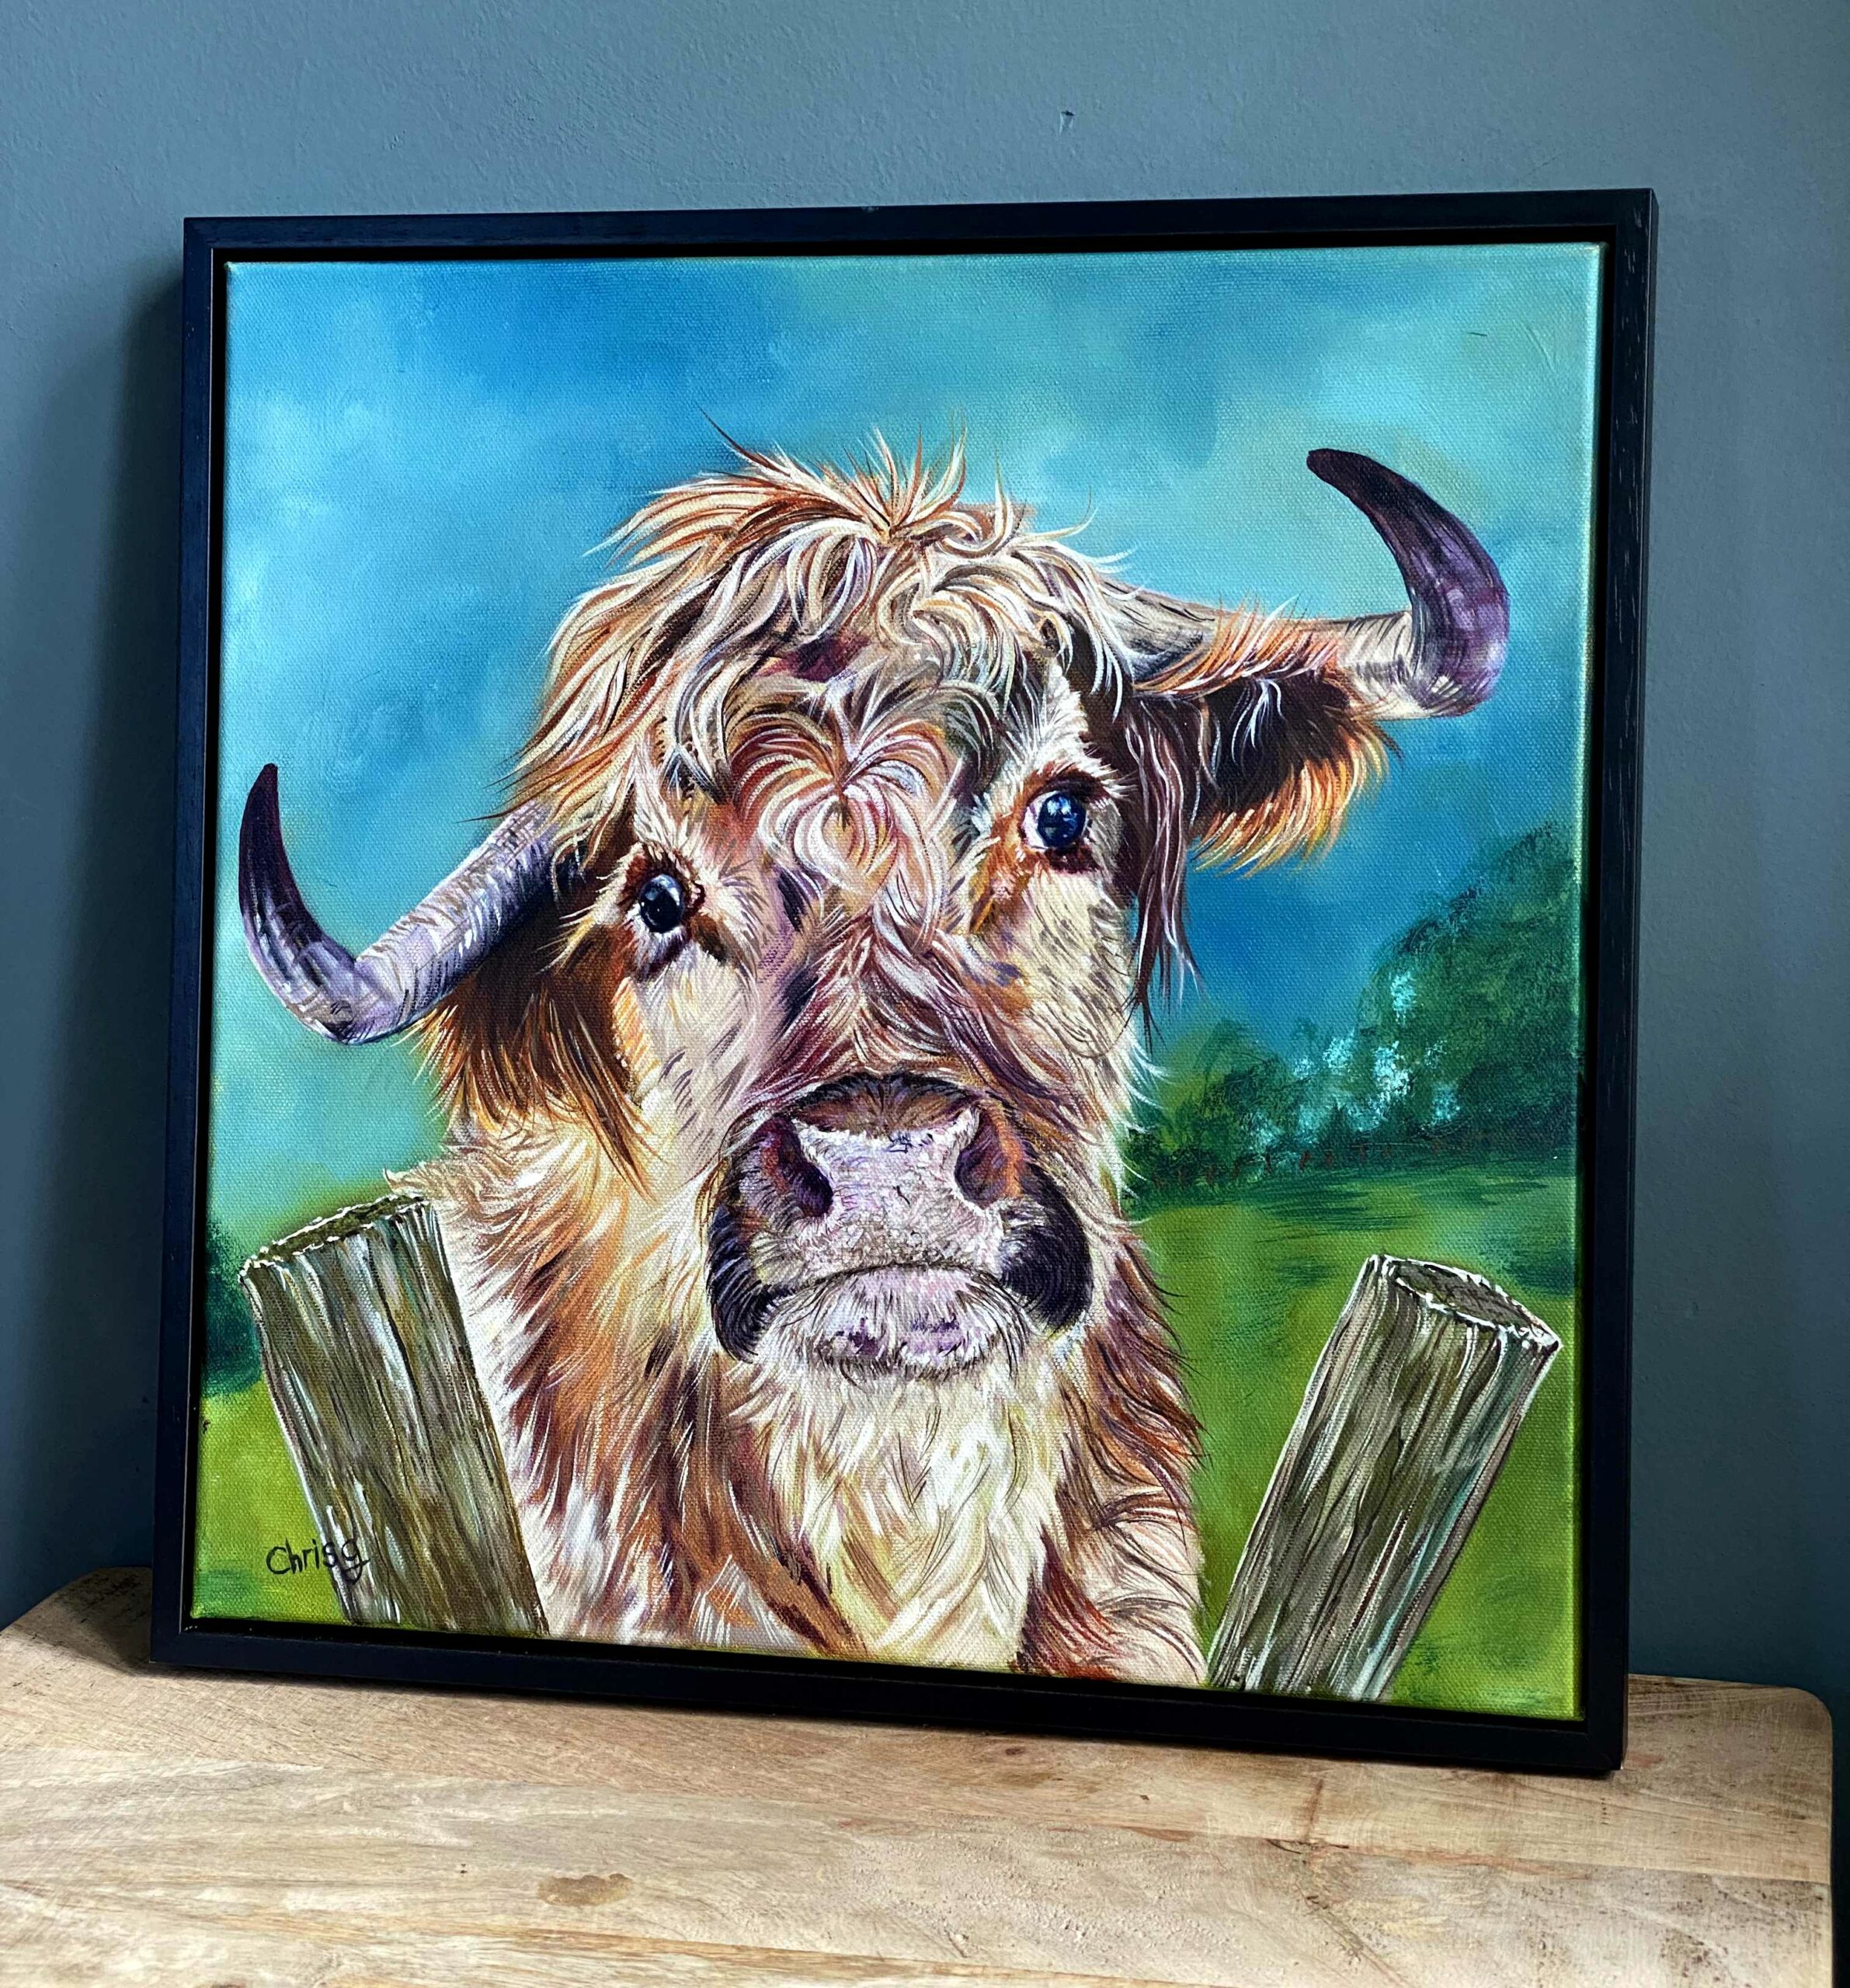 Fluff is a highland bullock. The original artwork is an oil painting 